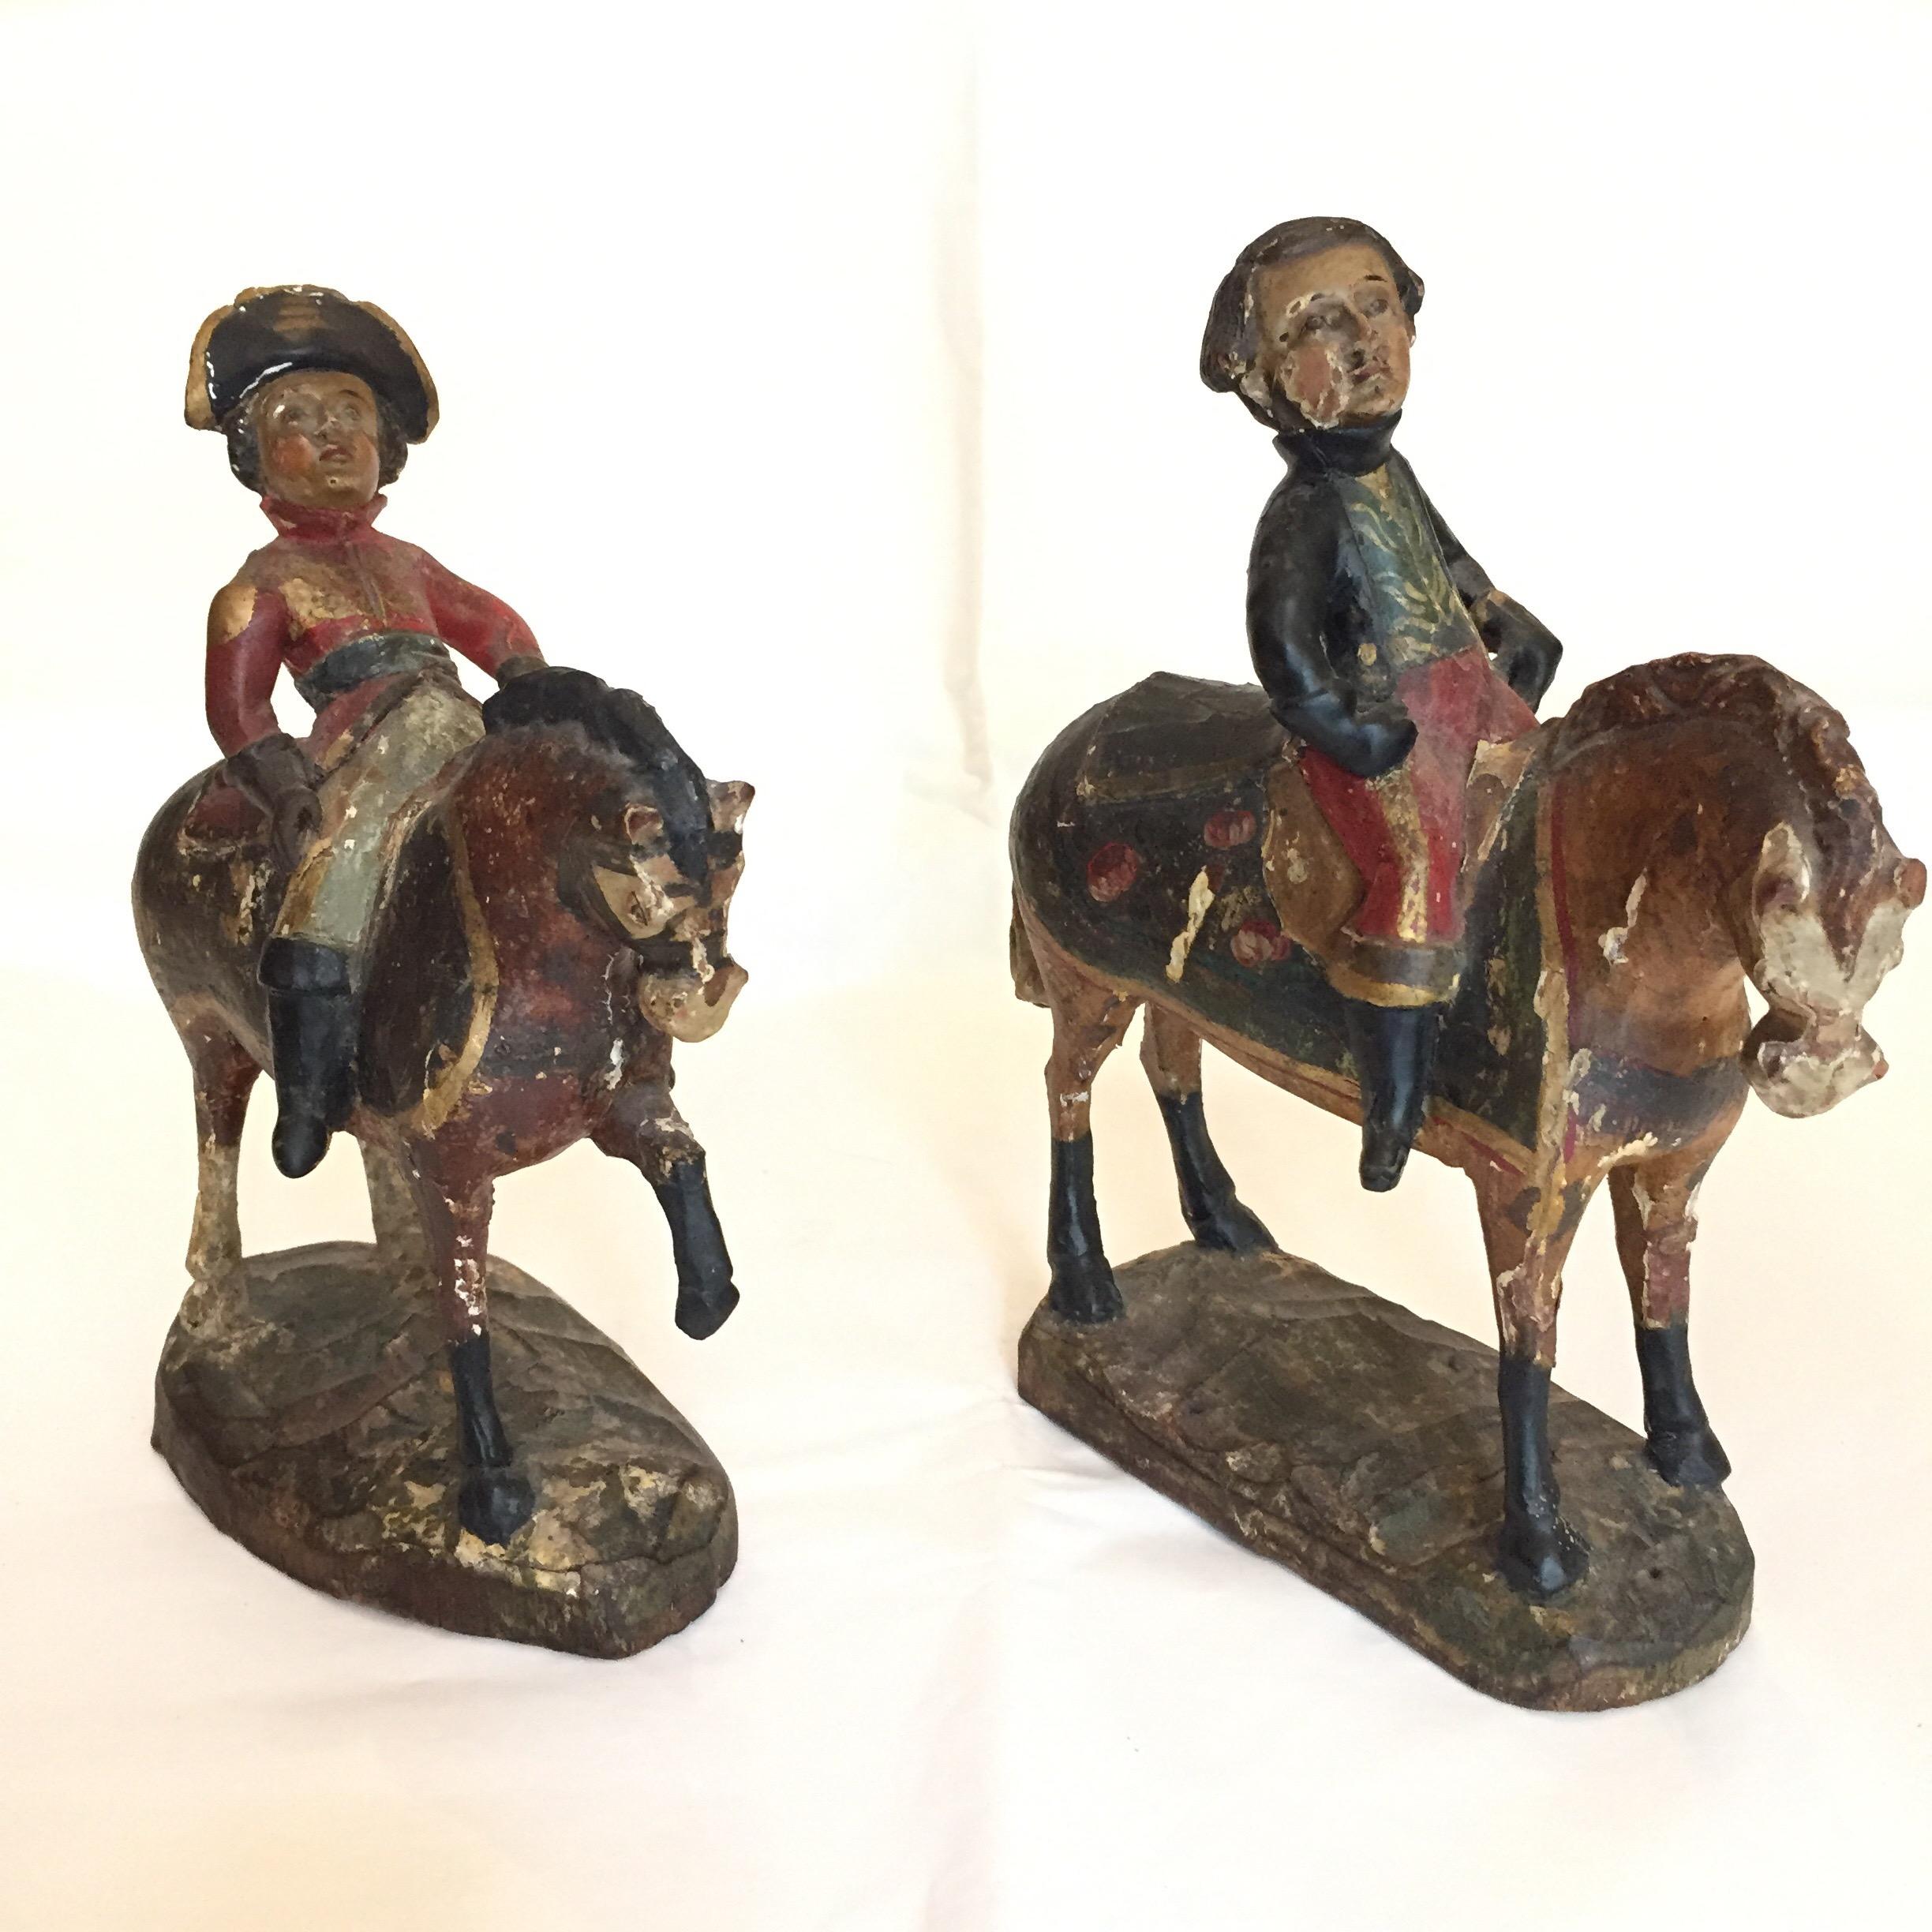 Pine 19th Century Italian Pair of Knights Sculptures Hand Carved Equestrian Soldiers